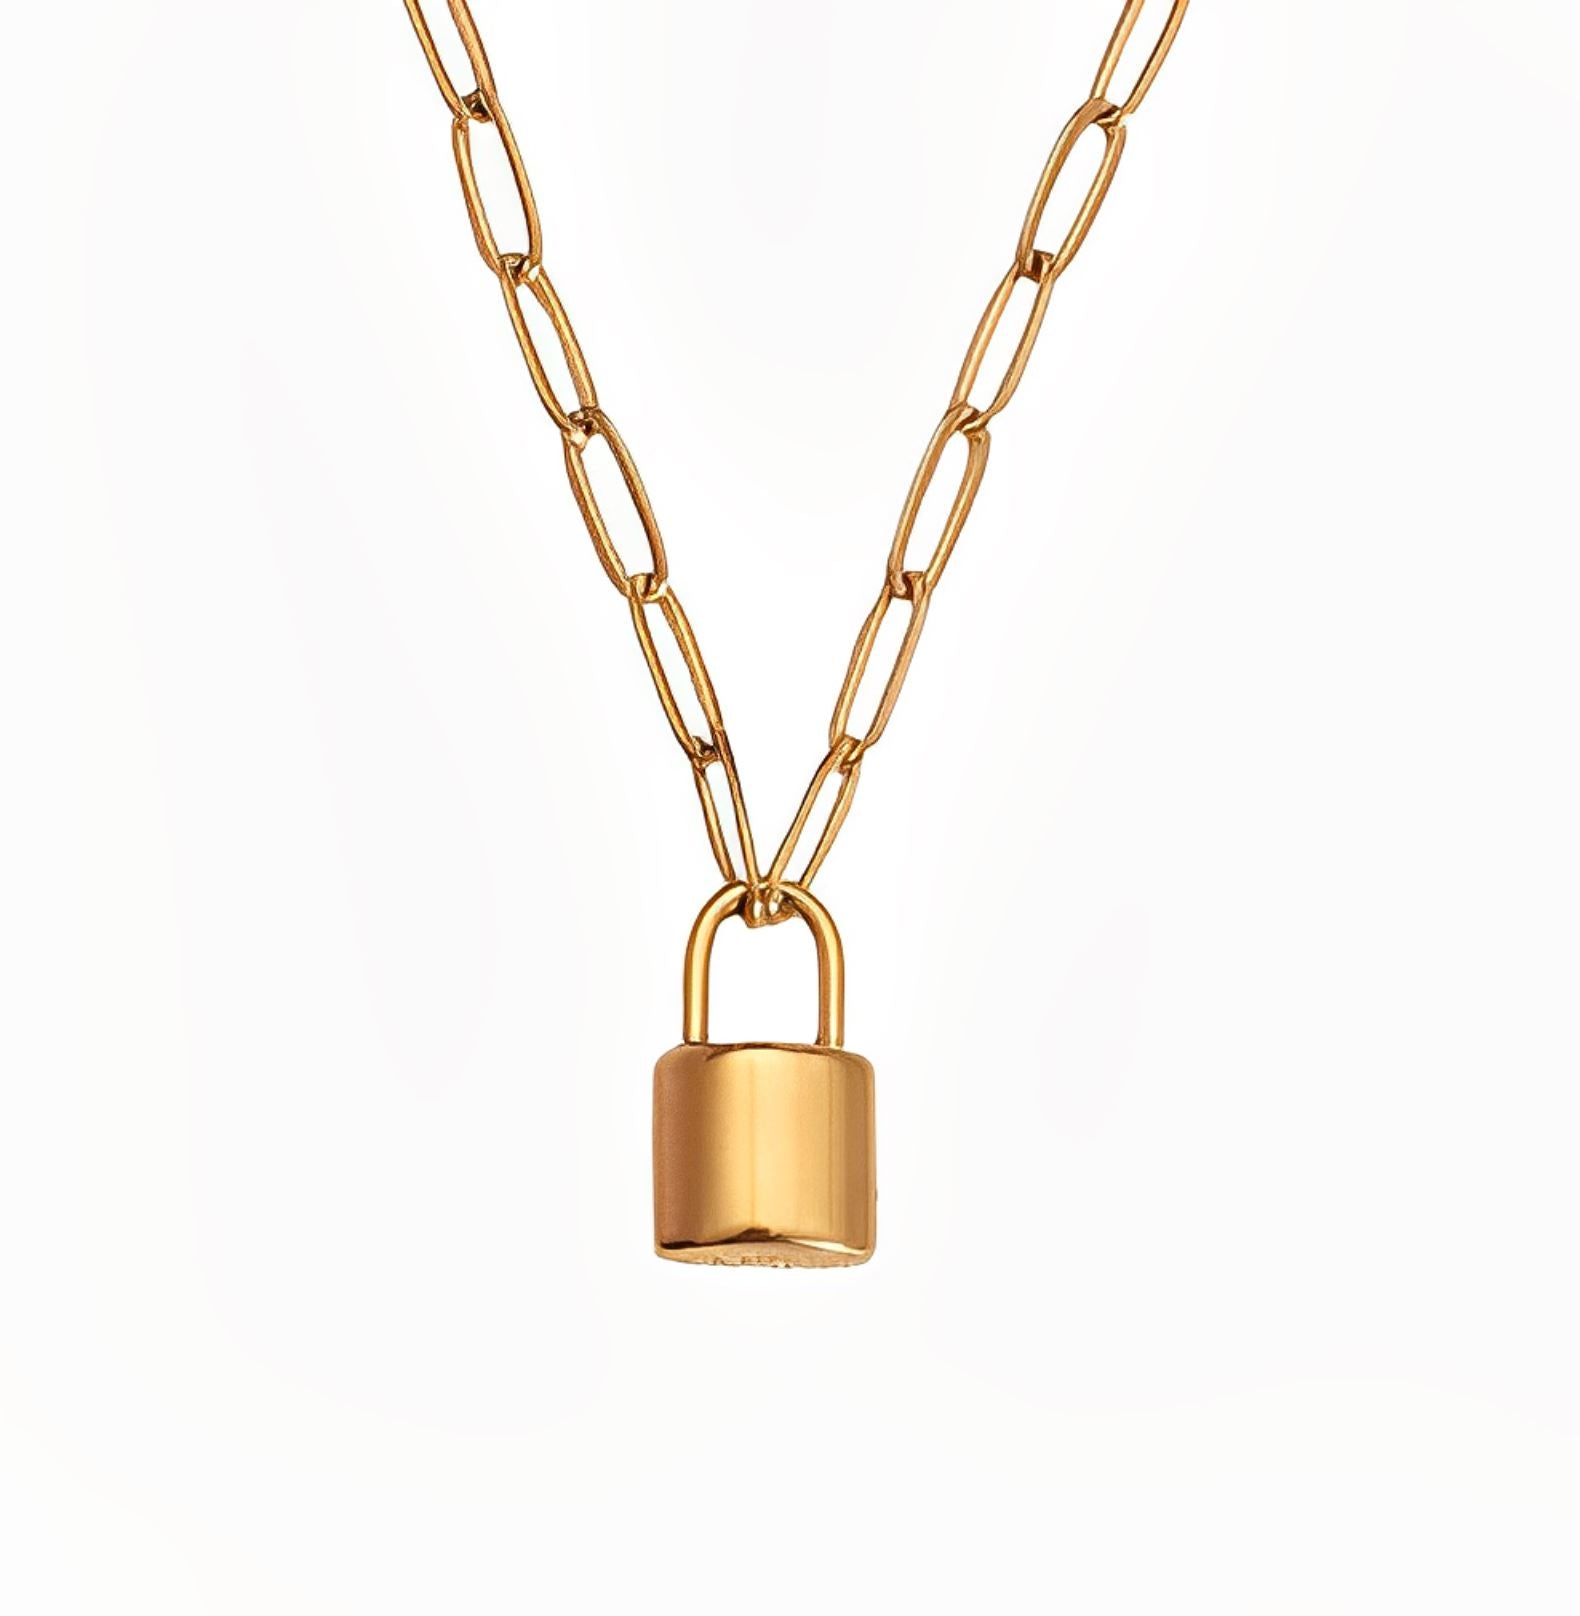 LOCK PENDANT NECKLACE braclet Yubama Jewelry Online Store - The Elegant Designs of Gold and Silver ! 